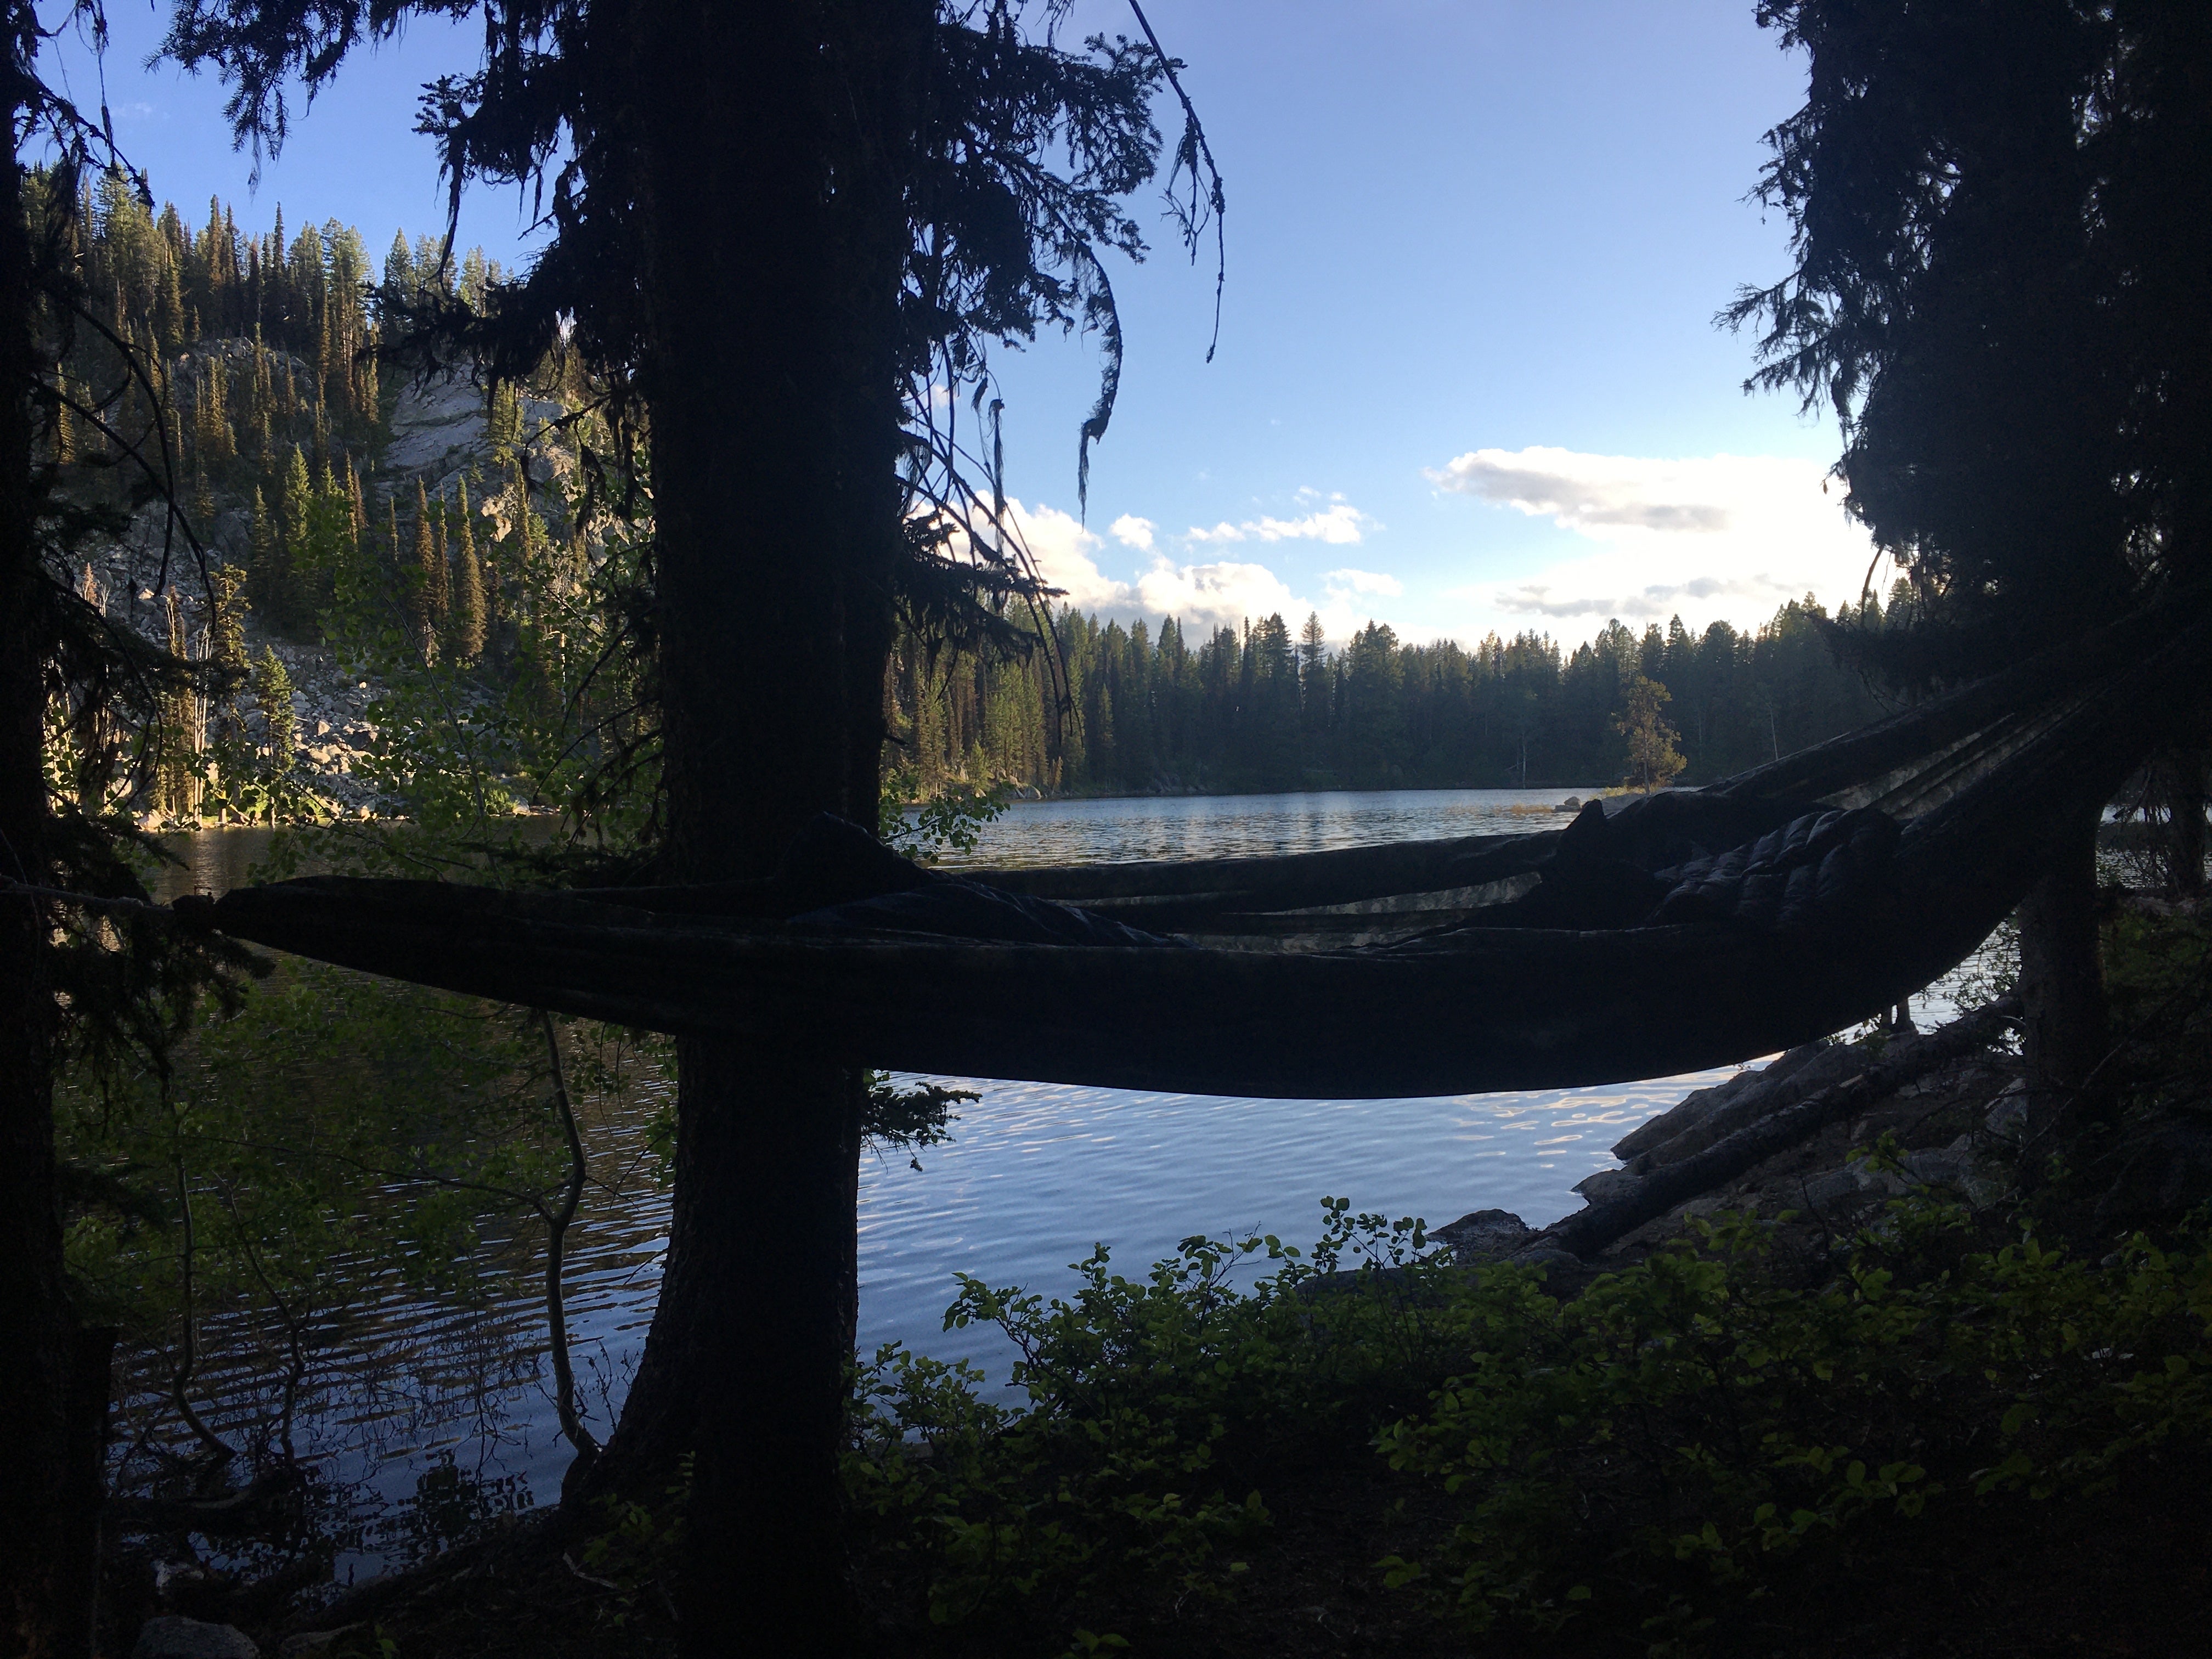 Camper submitted image from Lake Louie Dispersed Backcountry Camping - 4